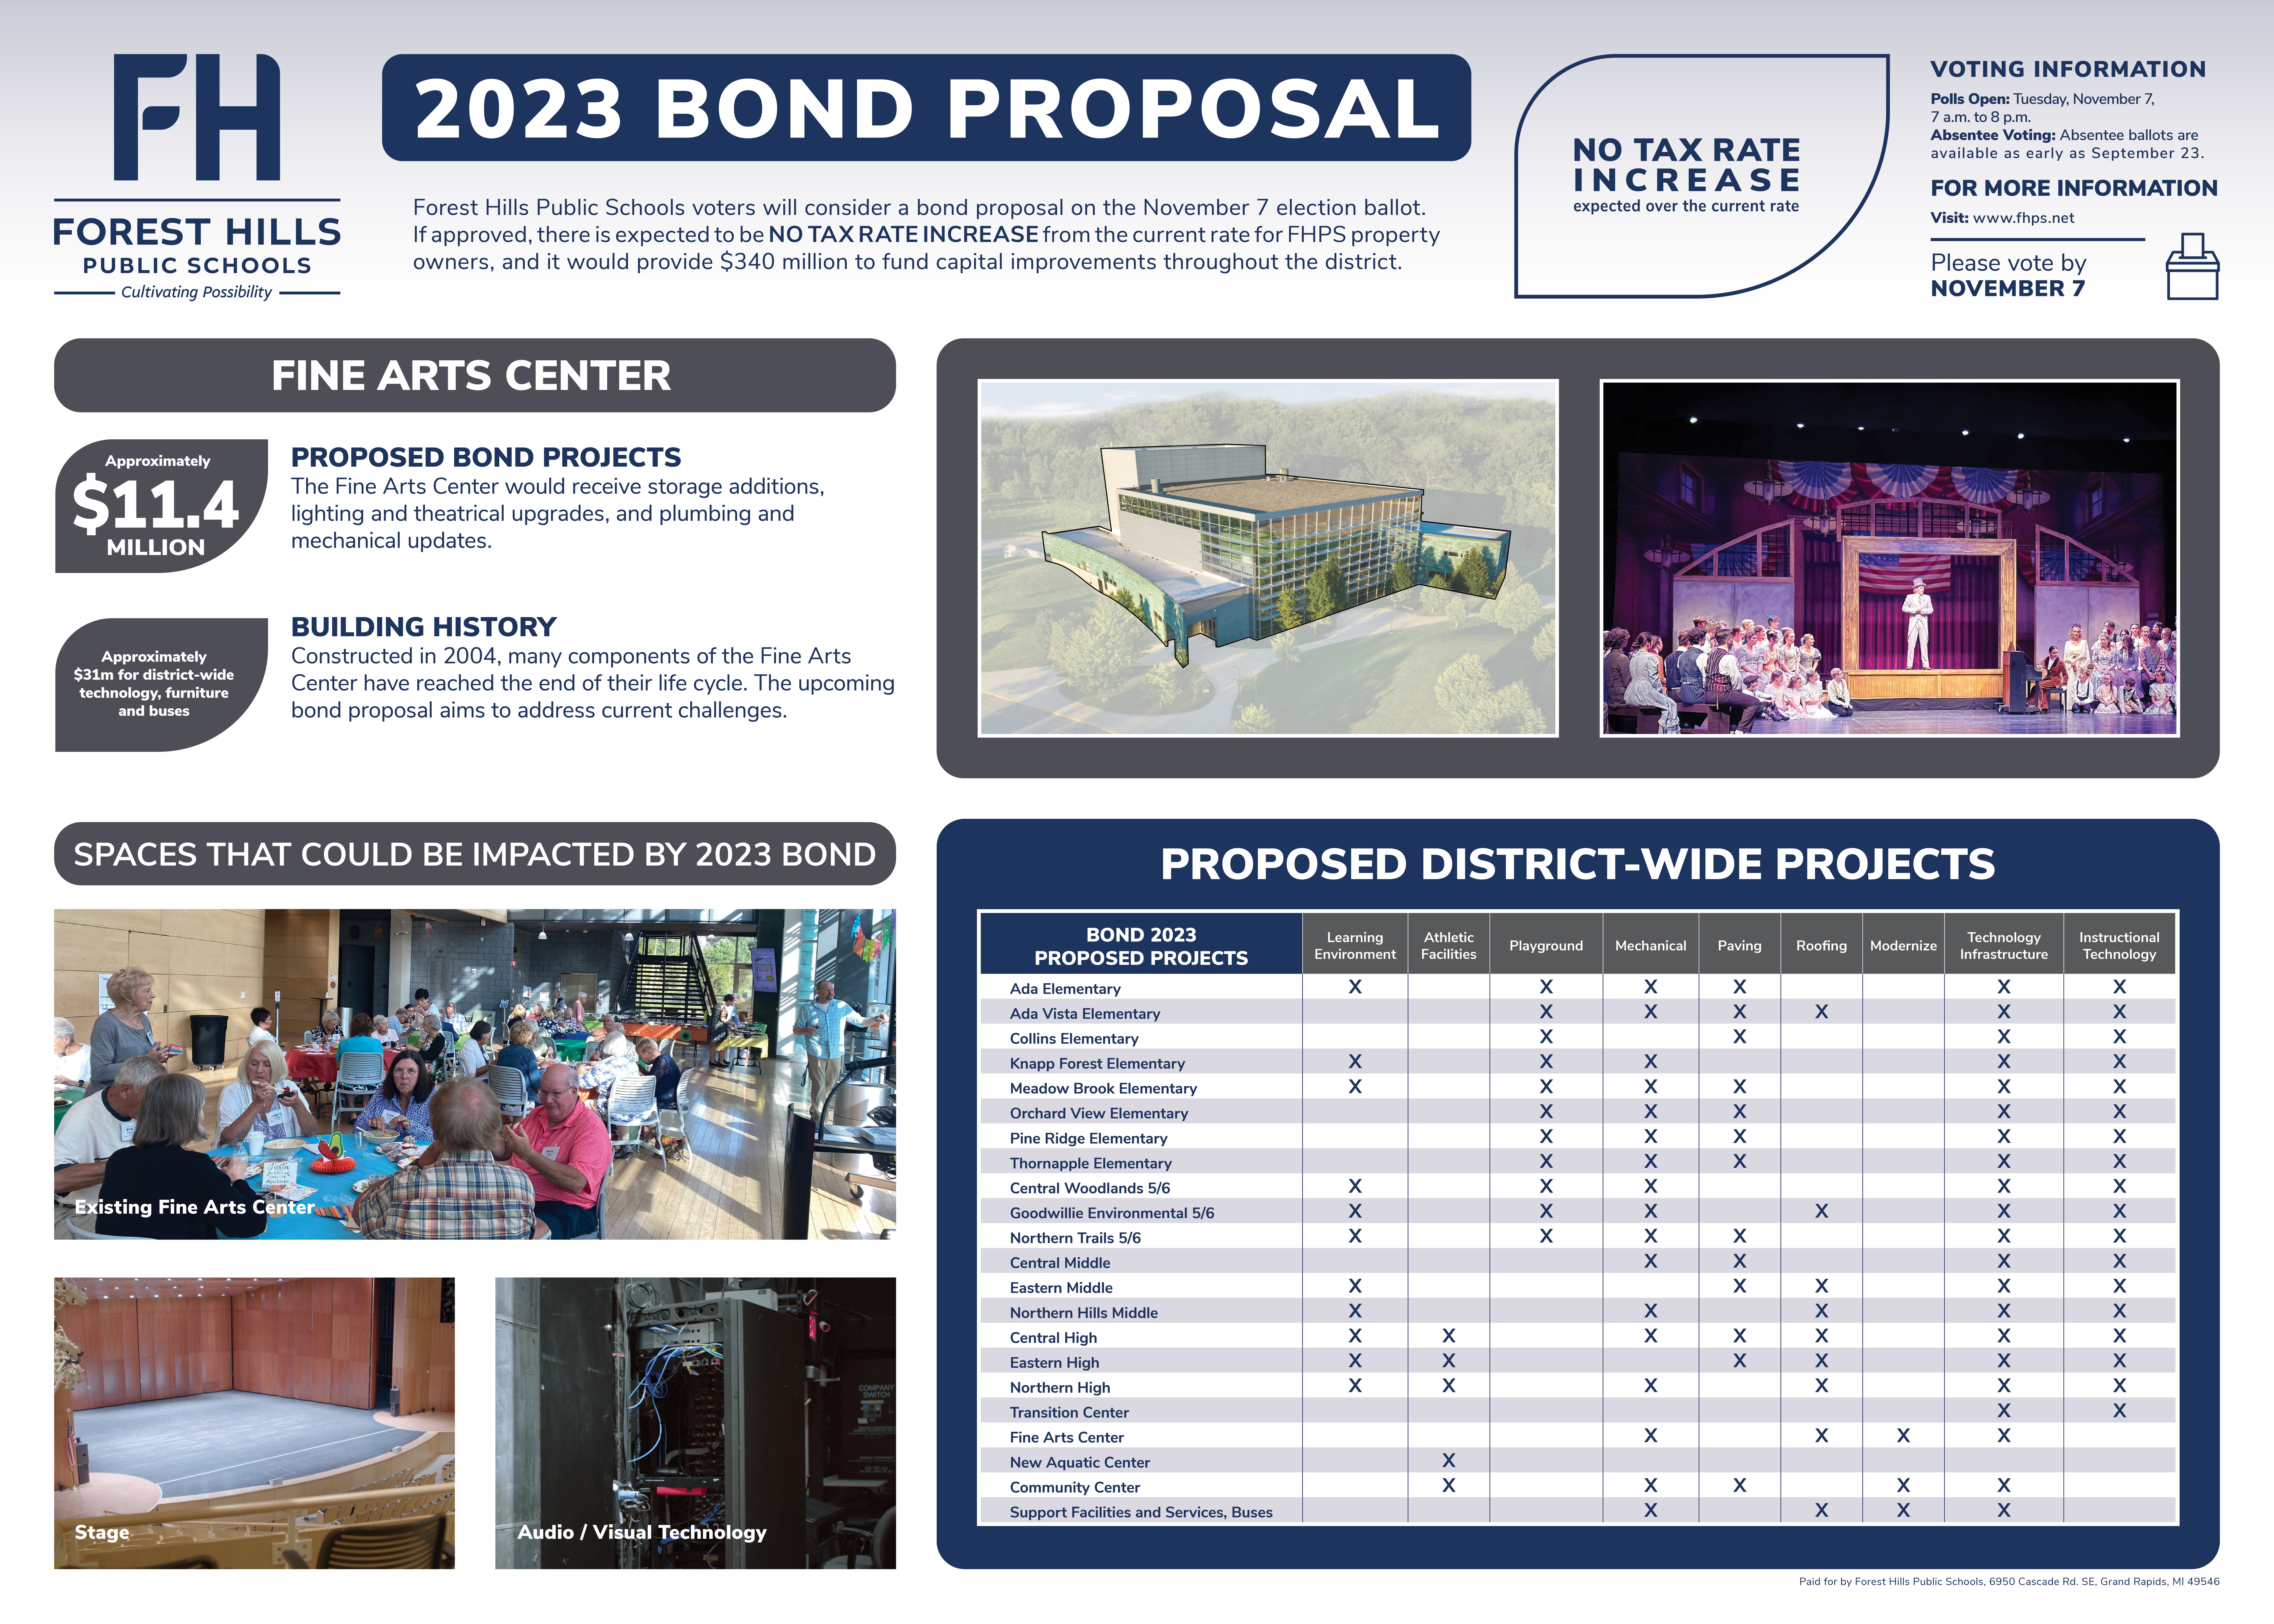 Fine Arts Center and pictures of the existing building and bond project pictures from 2018 and spaces that could be impacted by the 2023 bond.